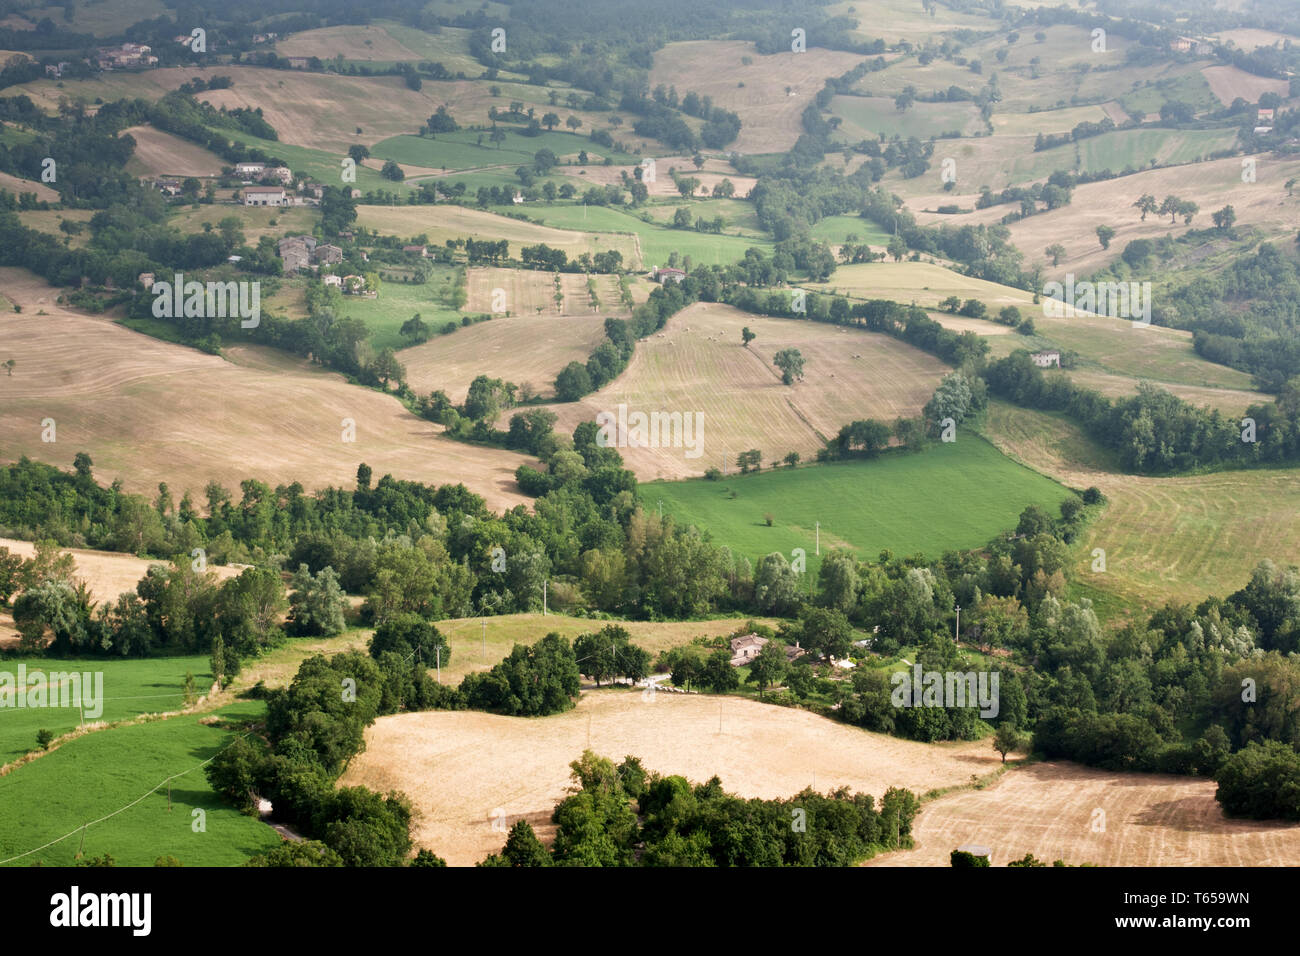 Beautiful Landscape, Marche or the Marches, a Region in Italy Stock Photo